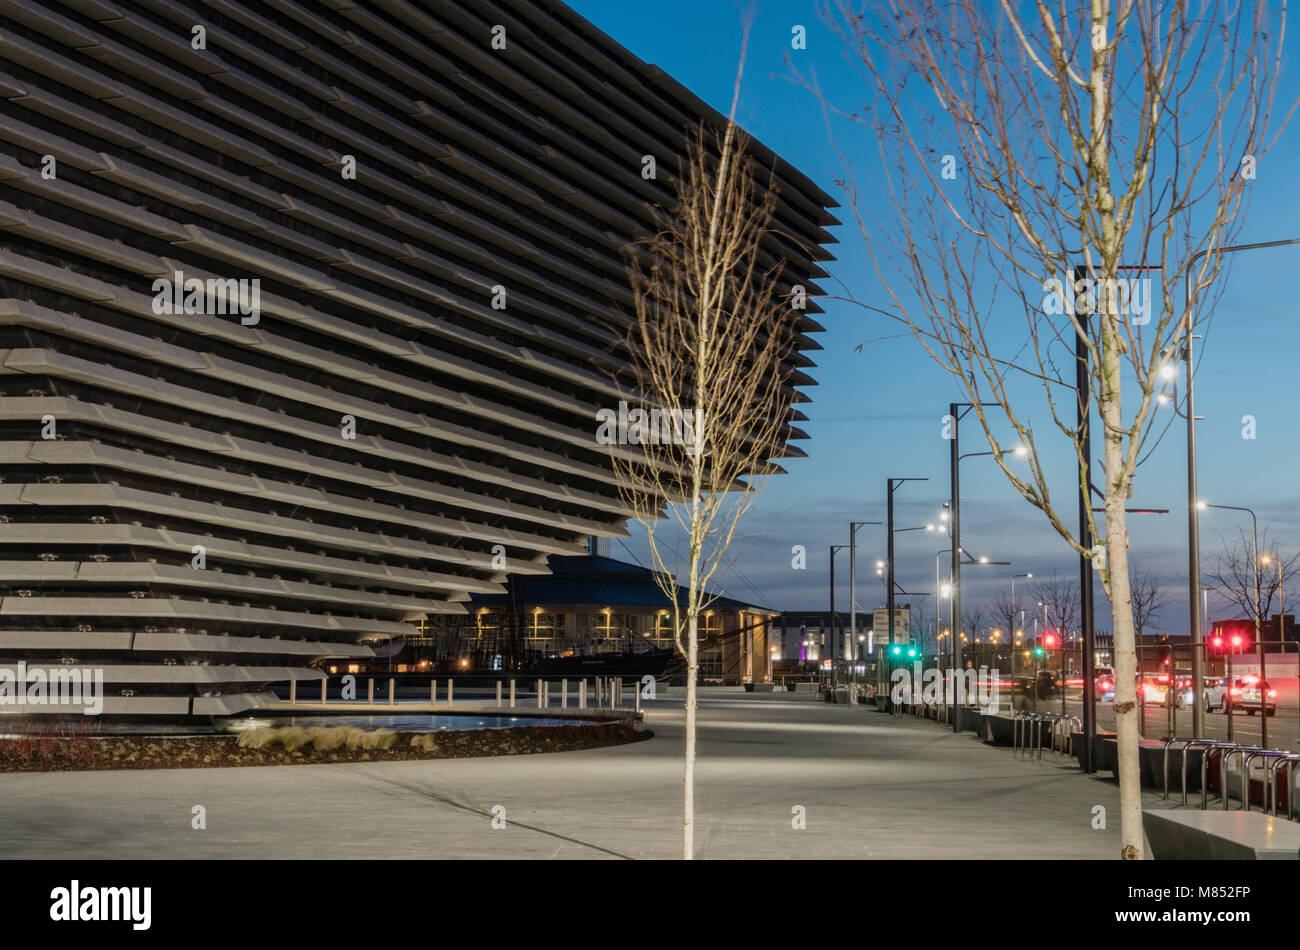 The V&A design museum in Dundee is a signature building by world famous Japanese architect Kengo Kuma. Stock Photo